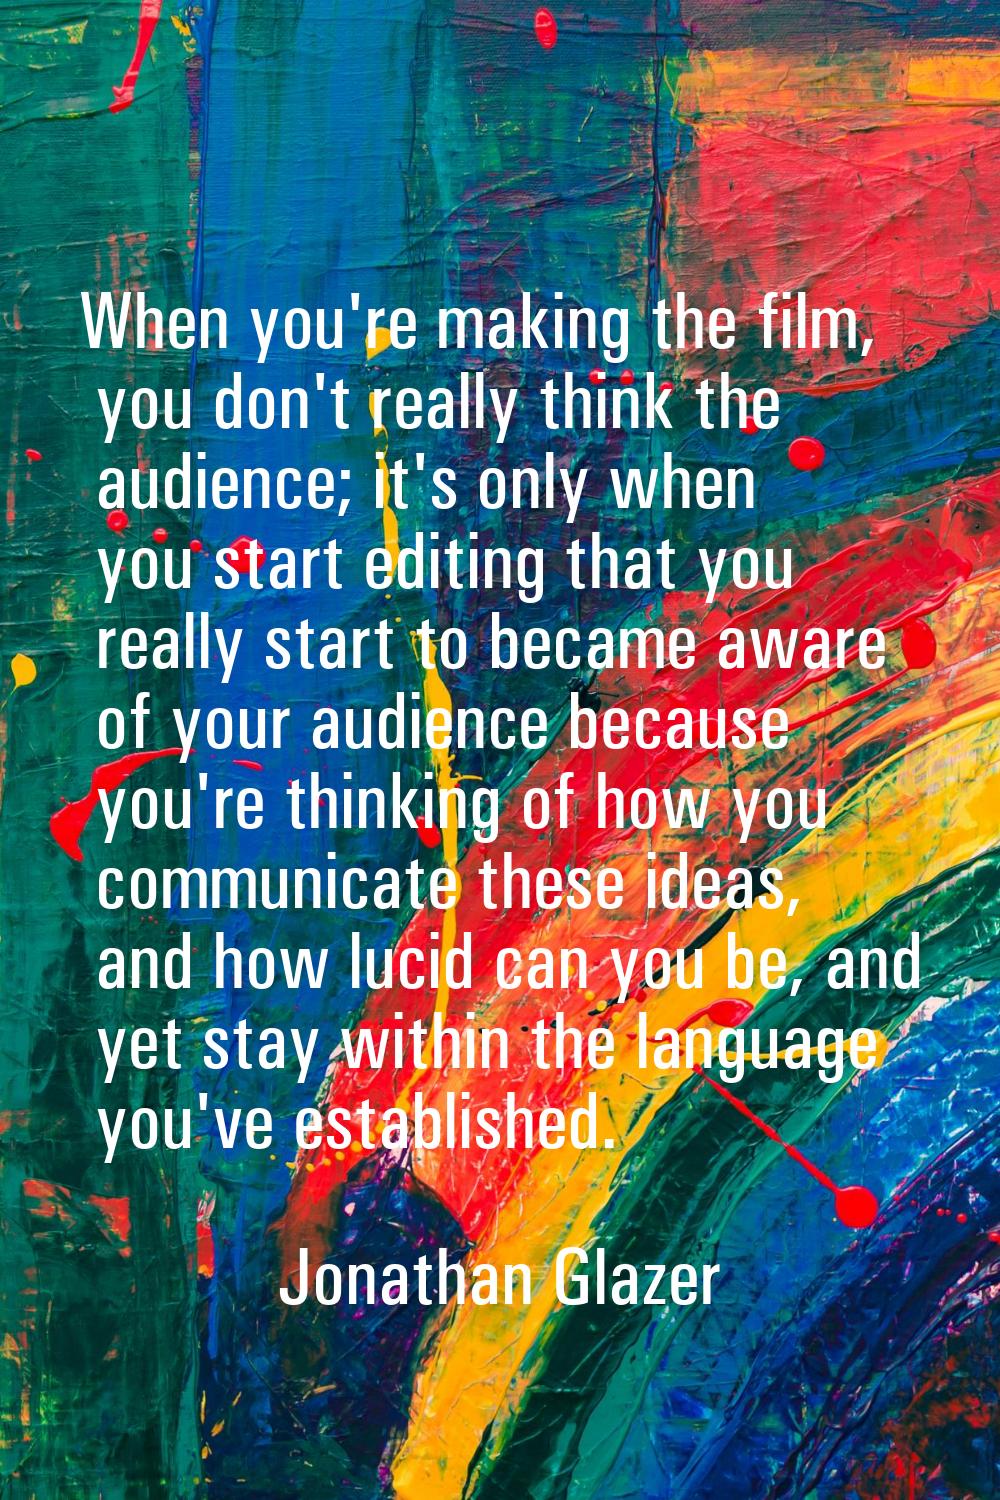 When you're making the film, you don't really think the audience; it's only when you start editing 